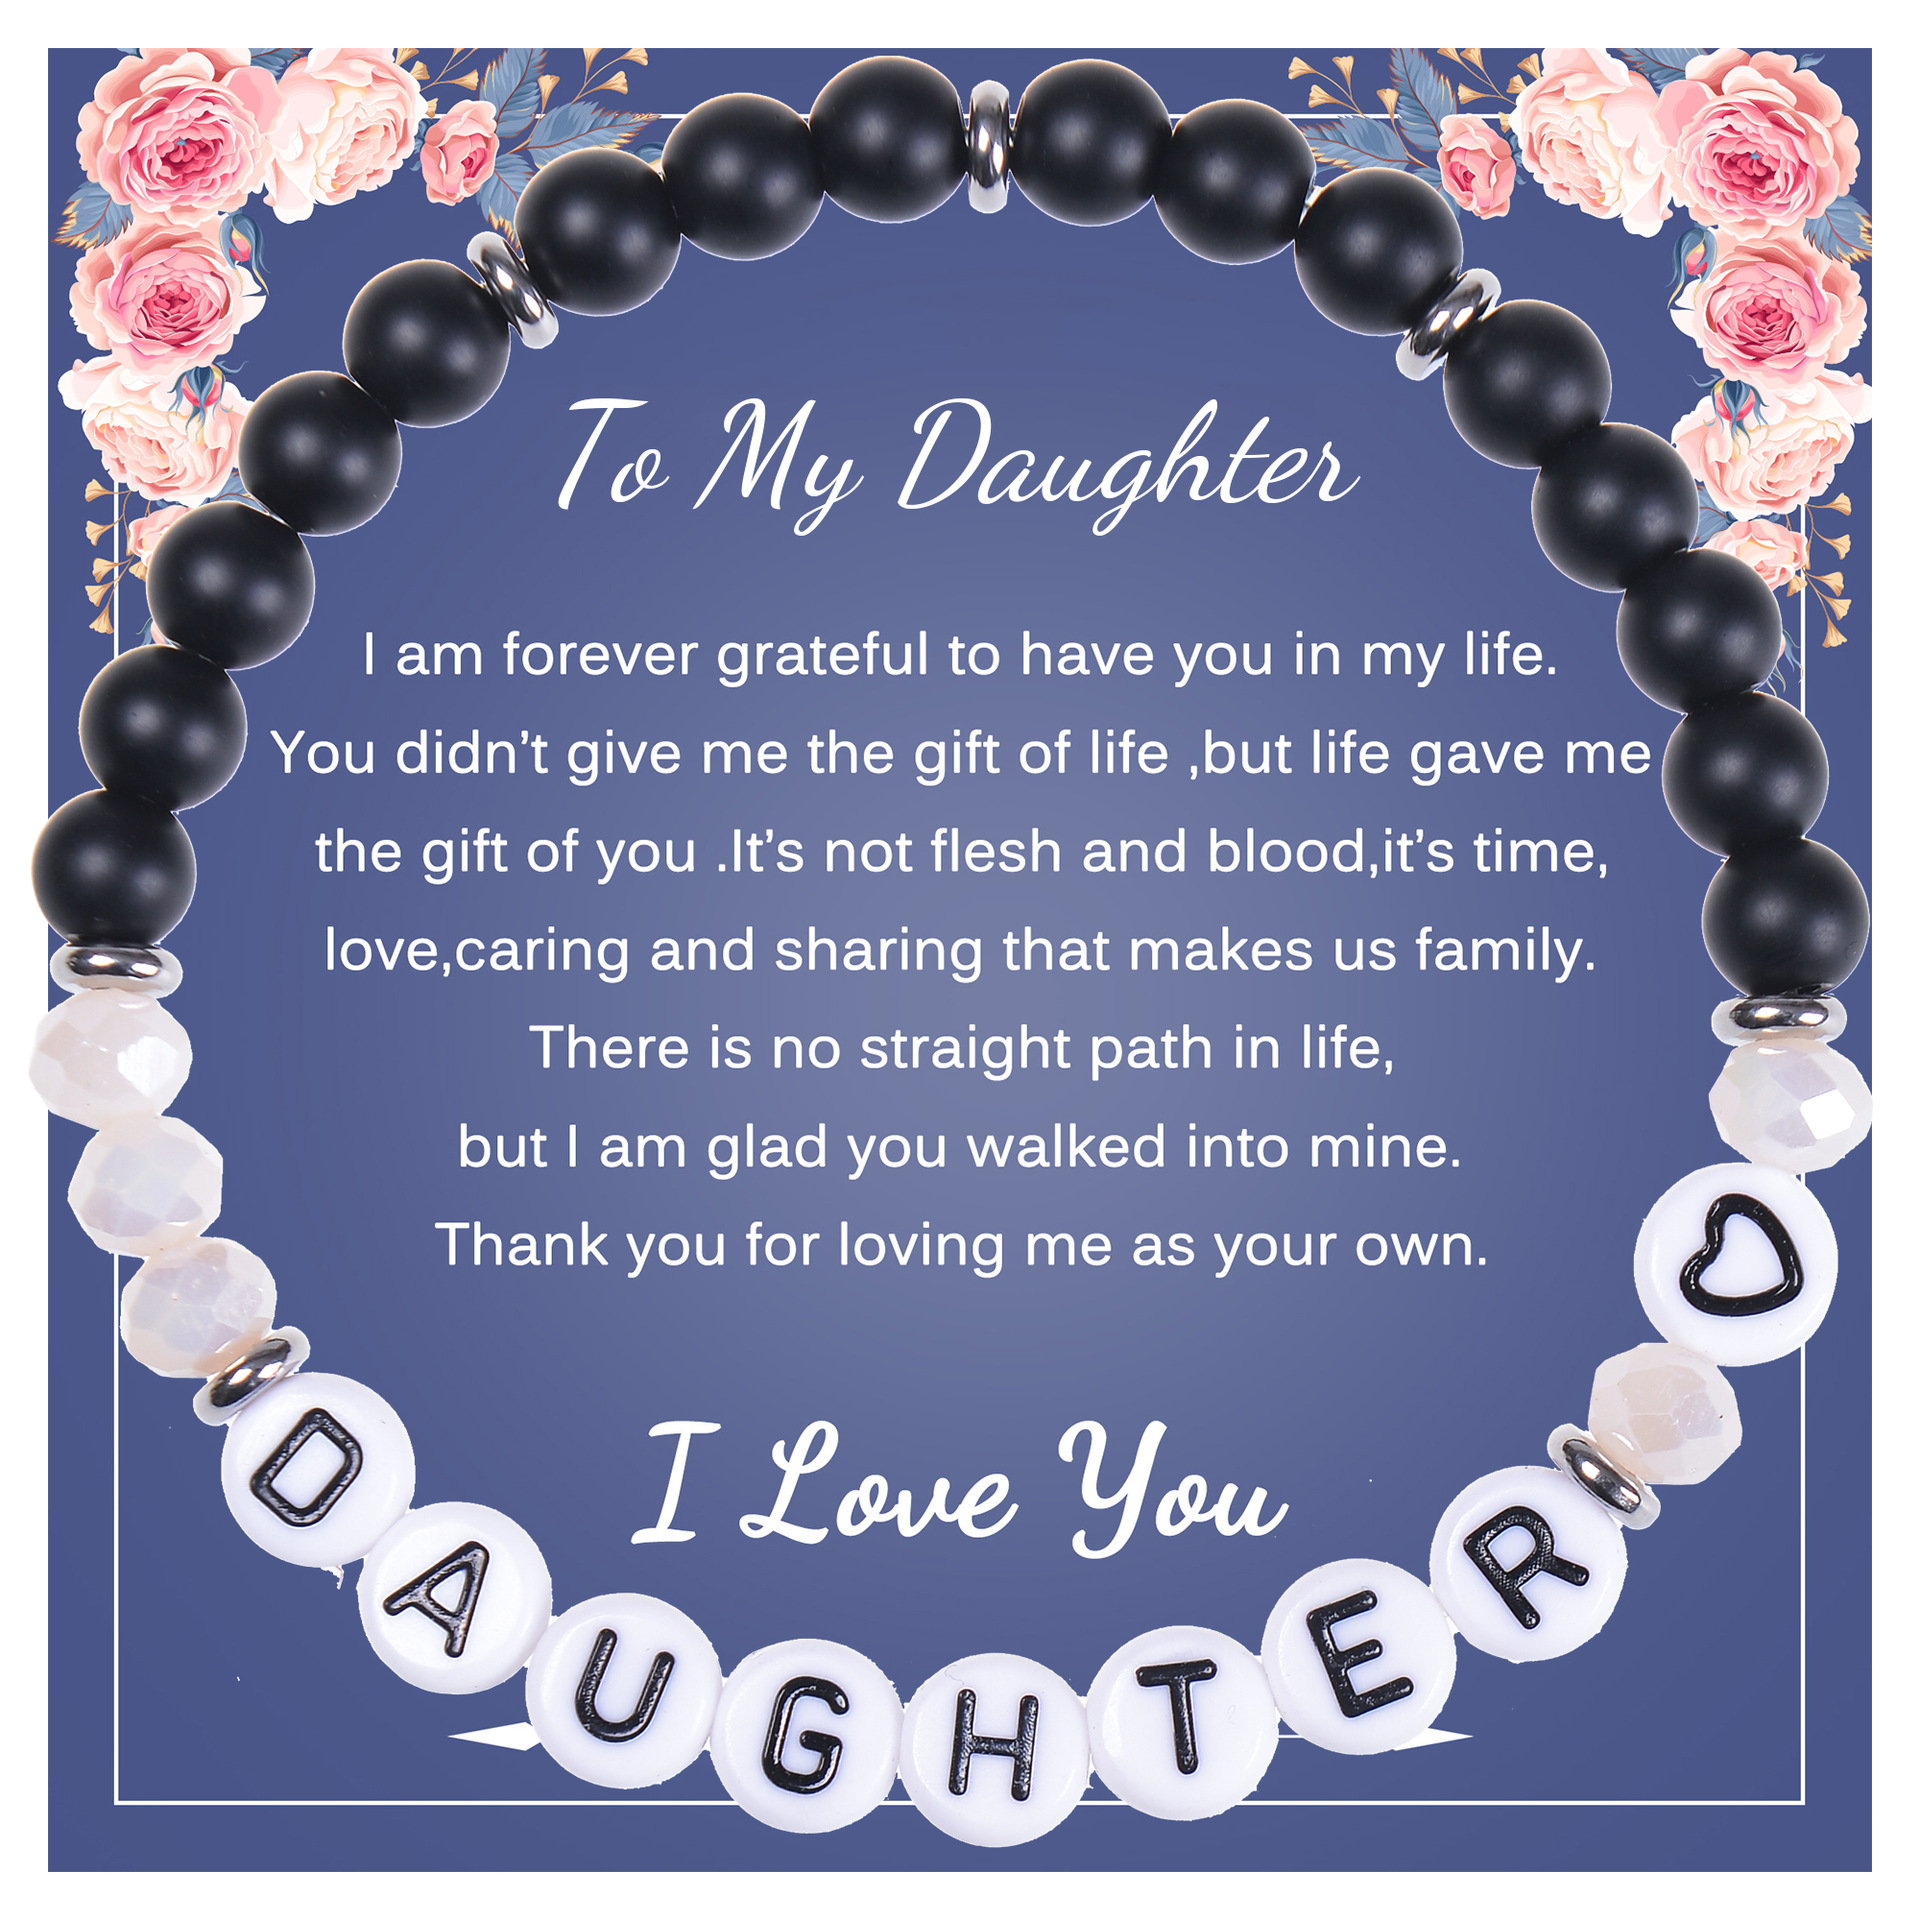 6:To My Daughter